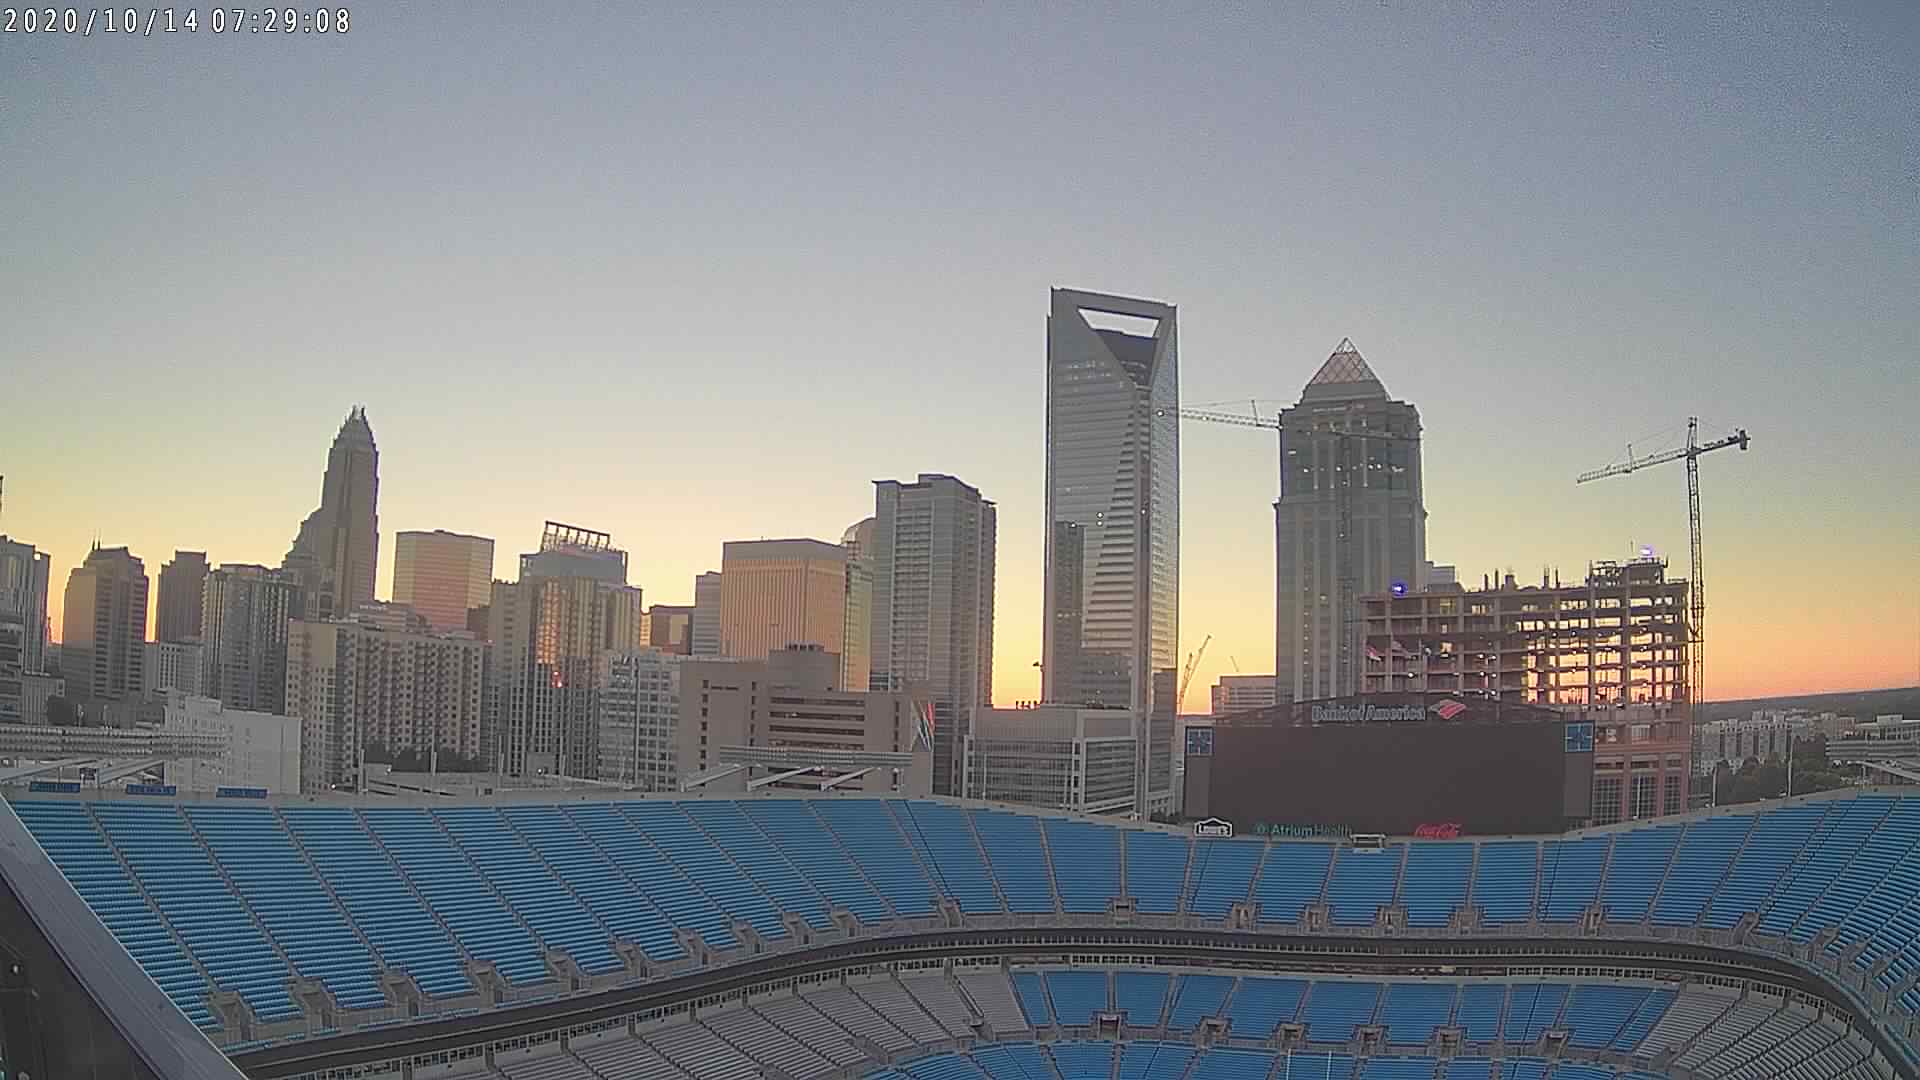 Bank of America Stadium uses high-tech weather station to keep fans, players safe